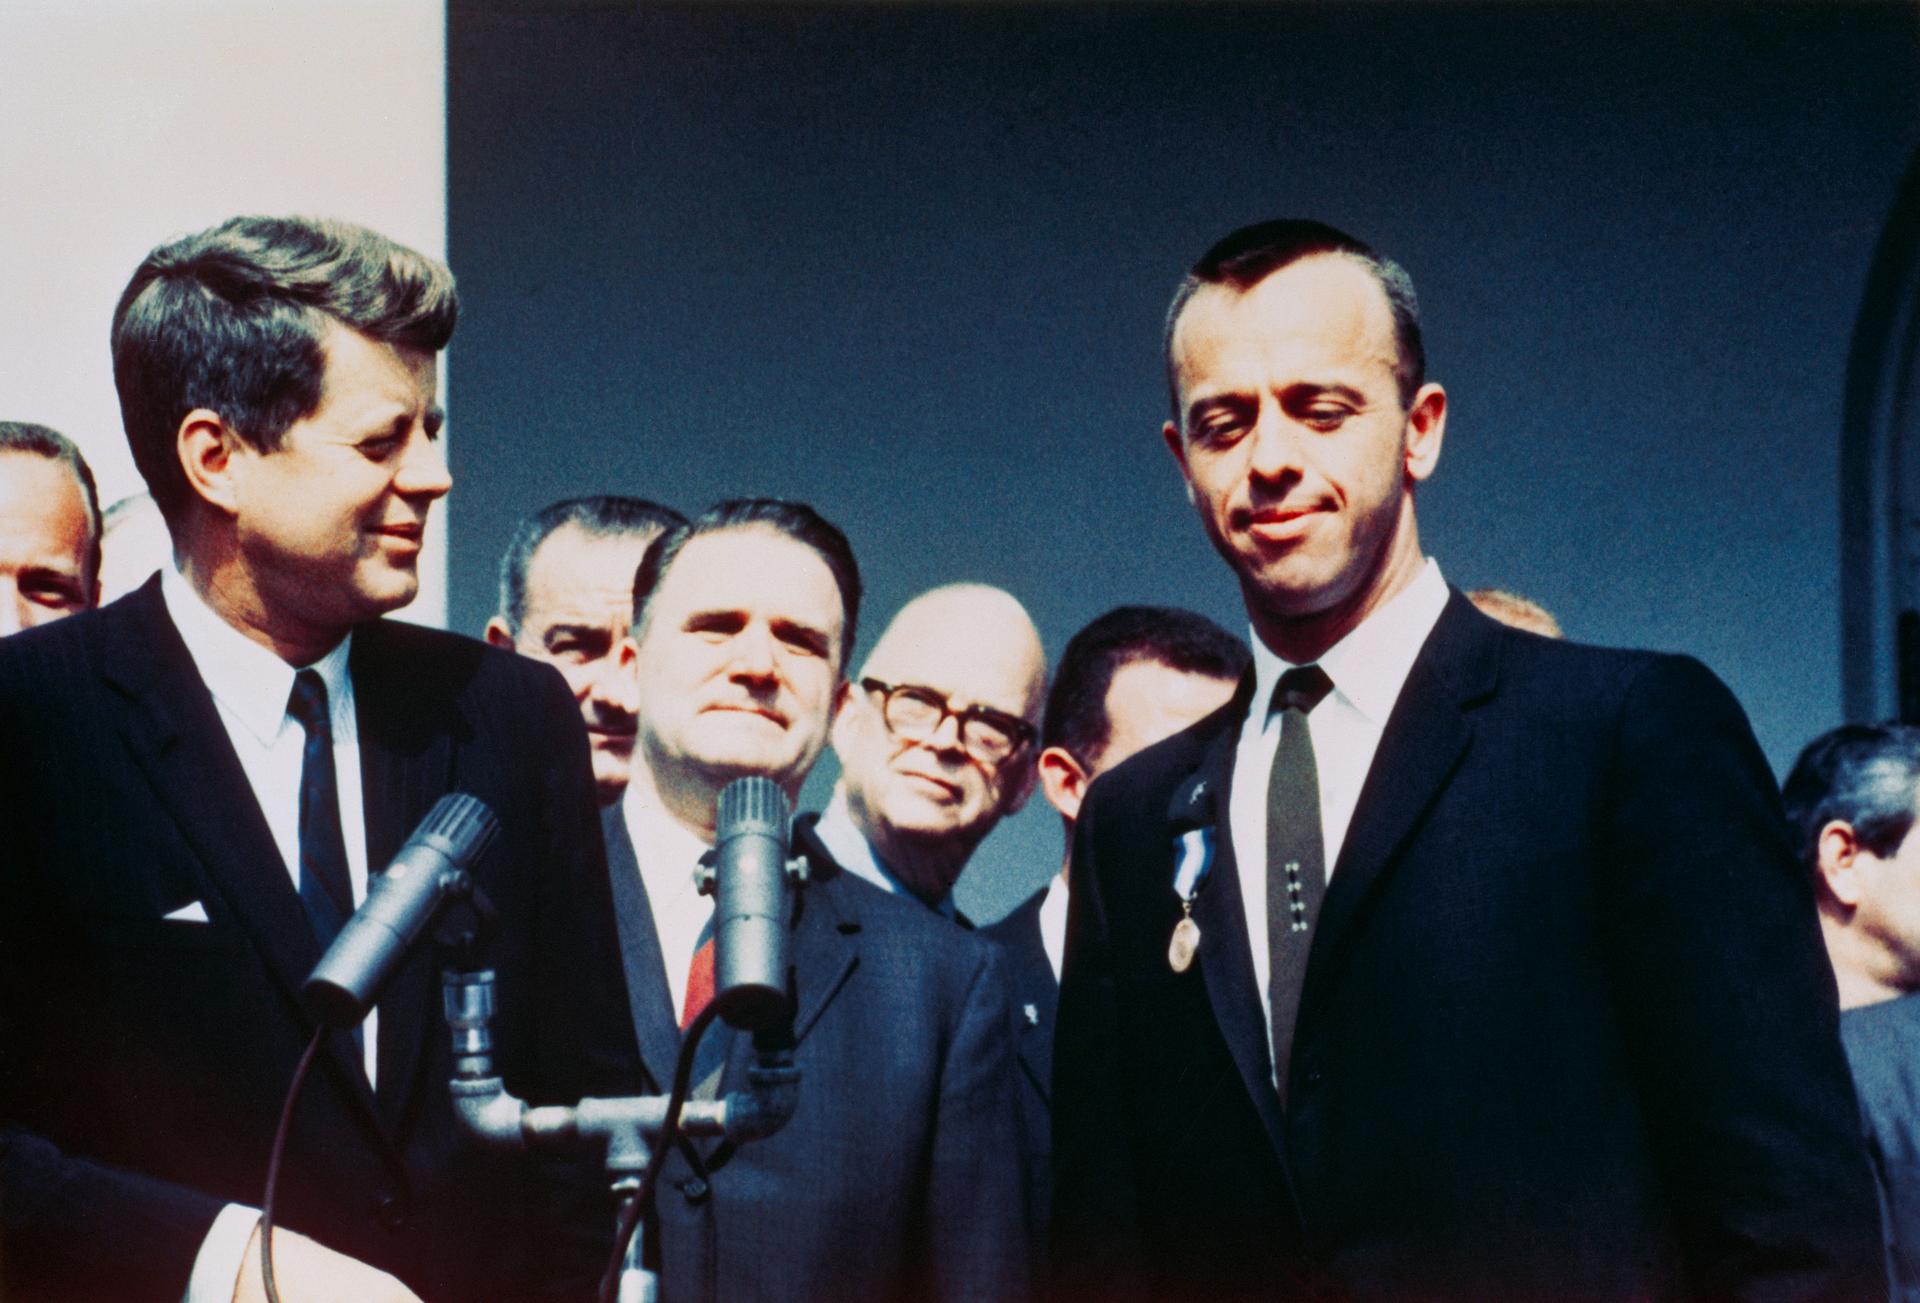 Alan Shepard shakes hands with president Kennedy after becoming first American in space